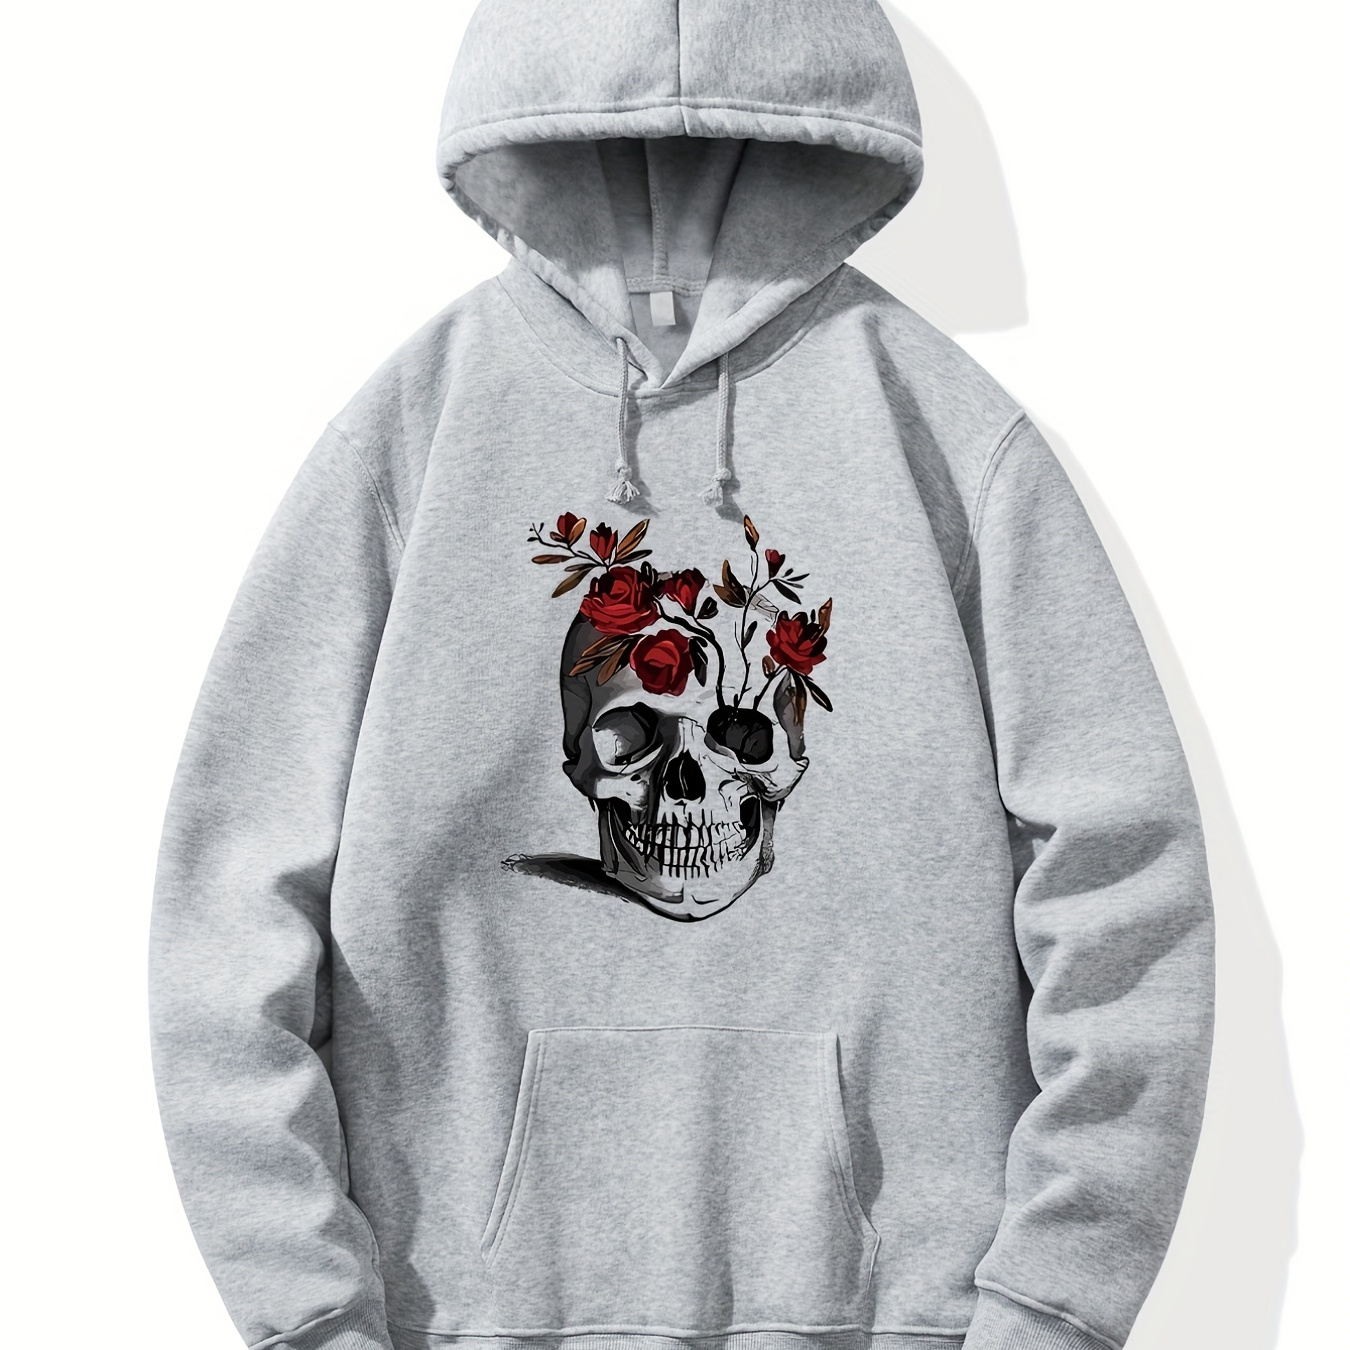 

Skull & Rose Print Hoodie, Hoodies For Men, Men’s Casual Graphic Design Pullover Hooded Sweatshirt With Kangaroo Pocket For Spring Fall, As Gifts